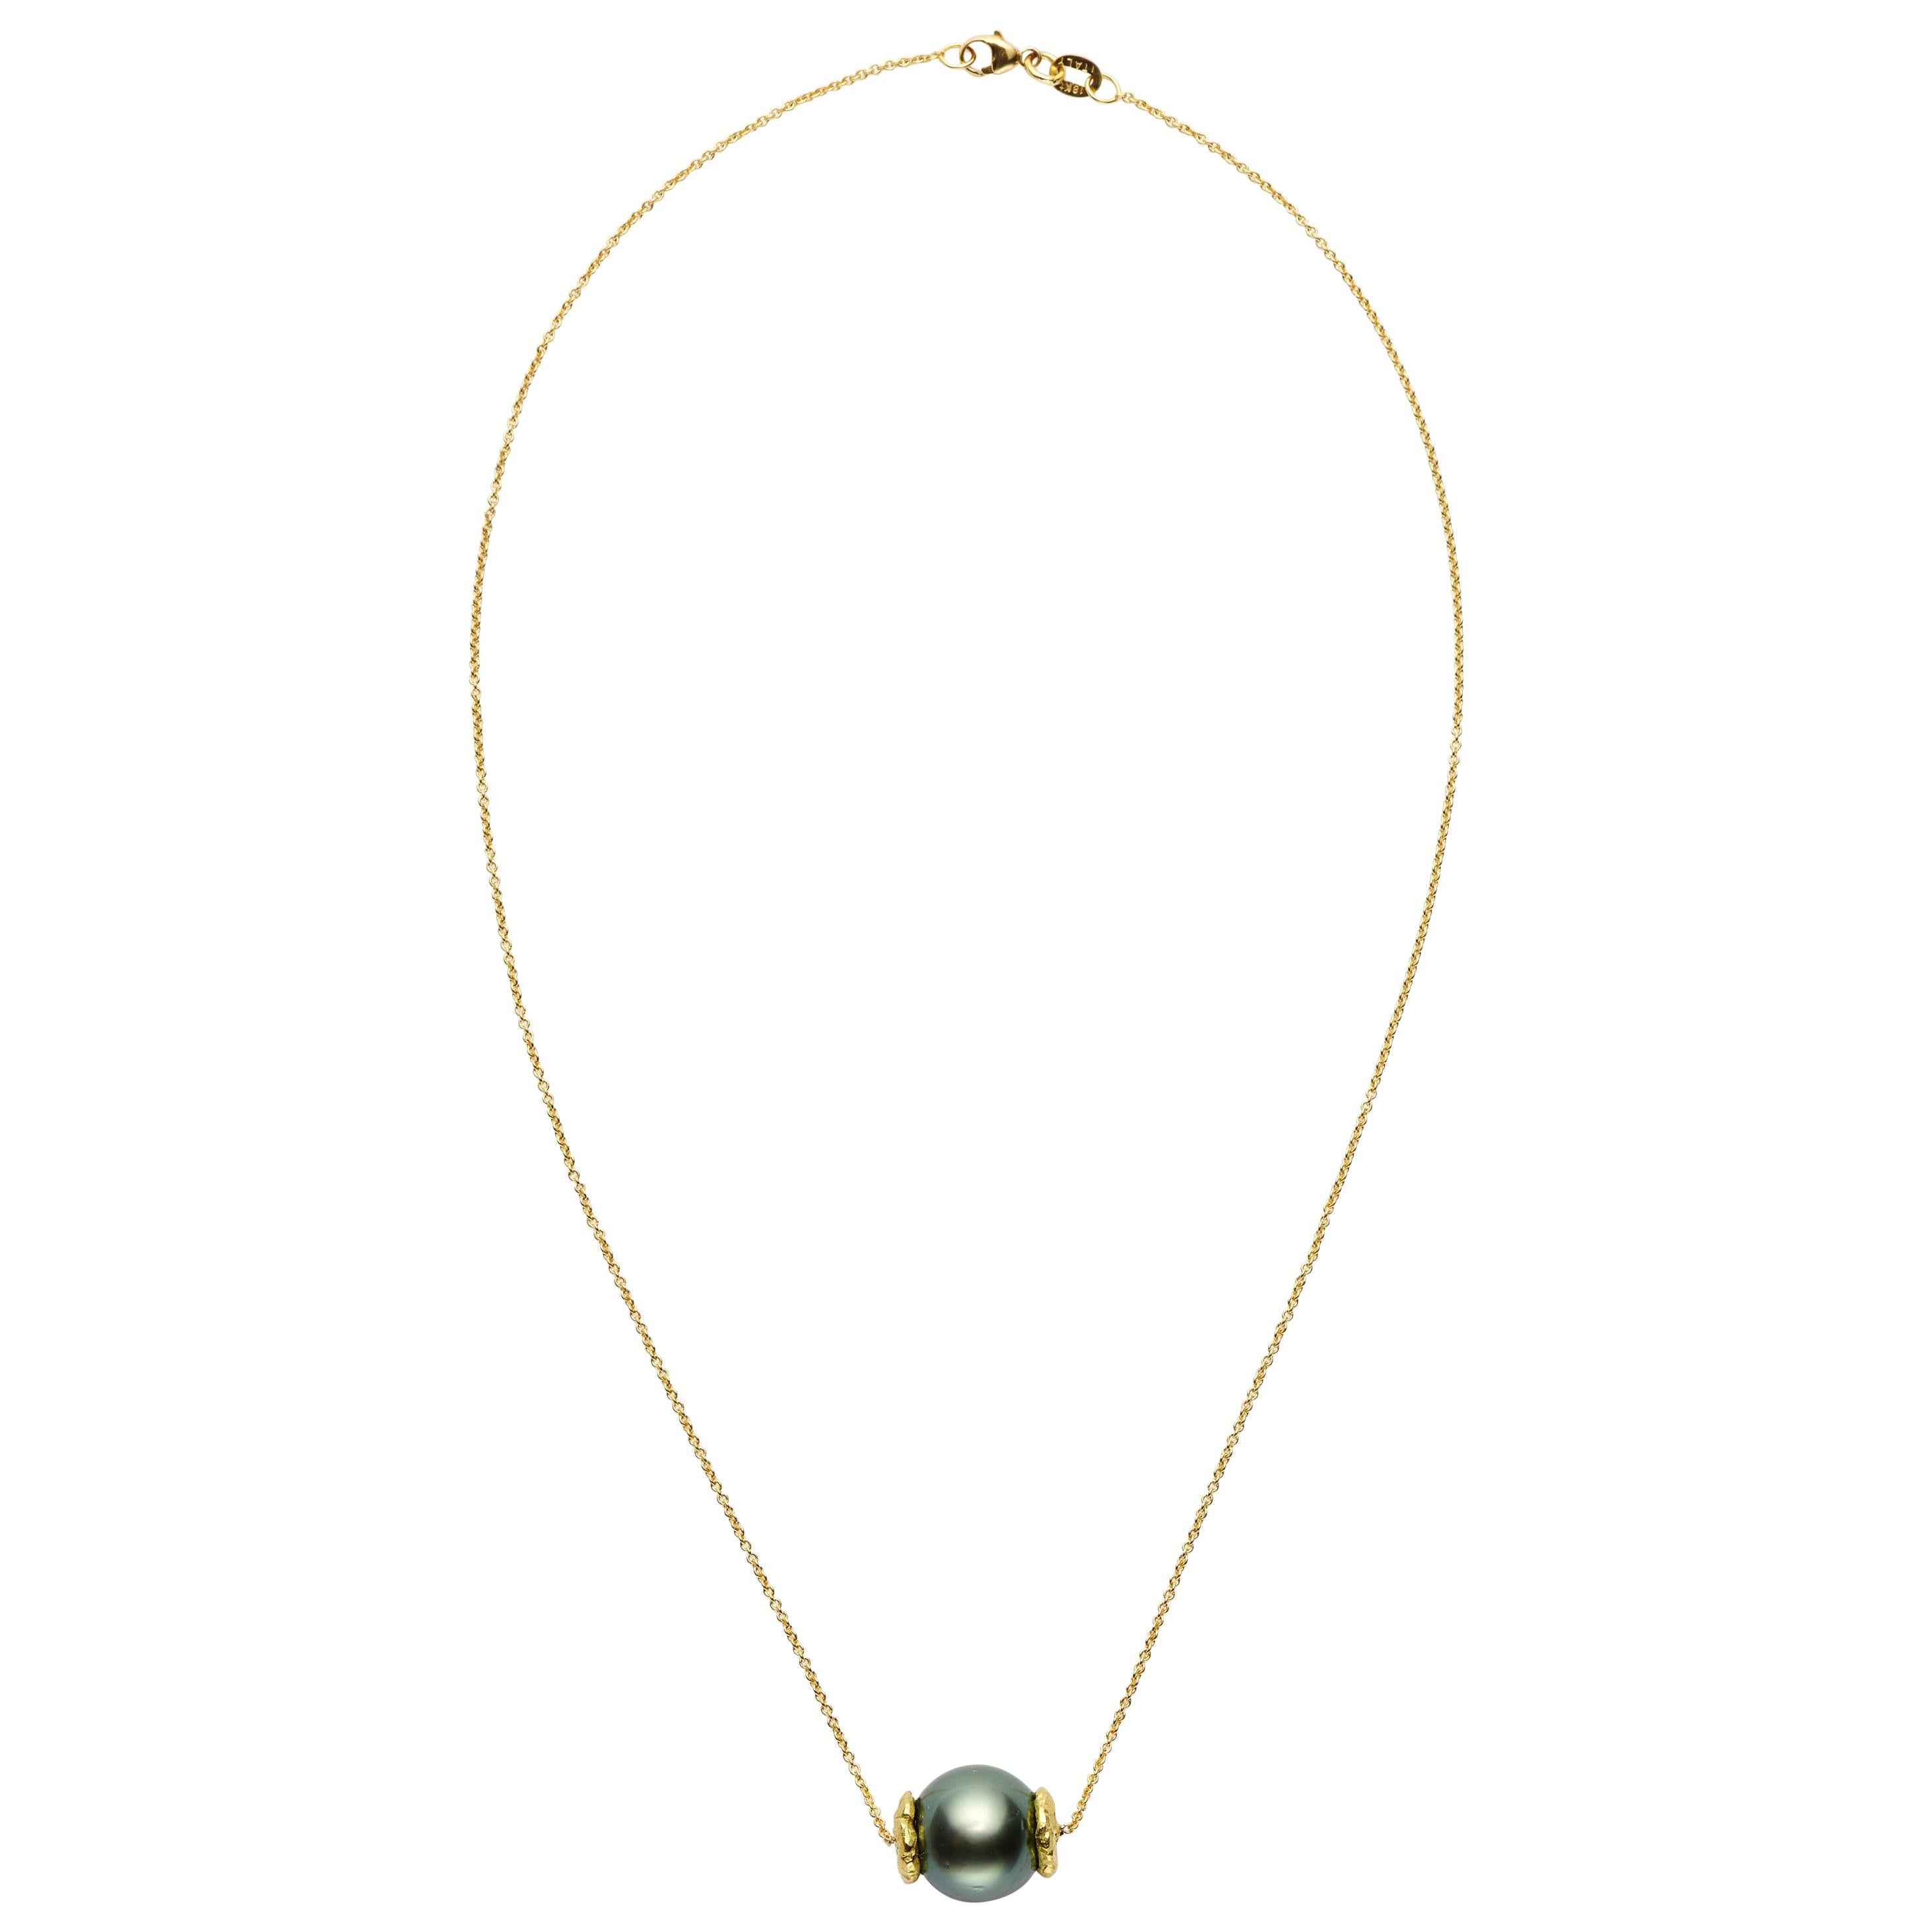 Susan Lister Locke Tahitian Black Pearl and 18 Karat Gold "Seaquin" Necklace For Sale